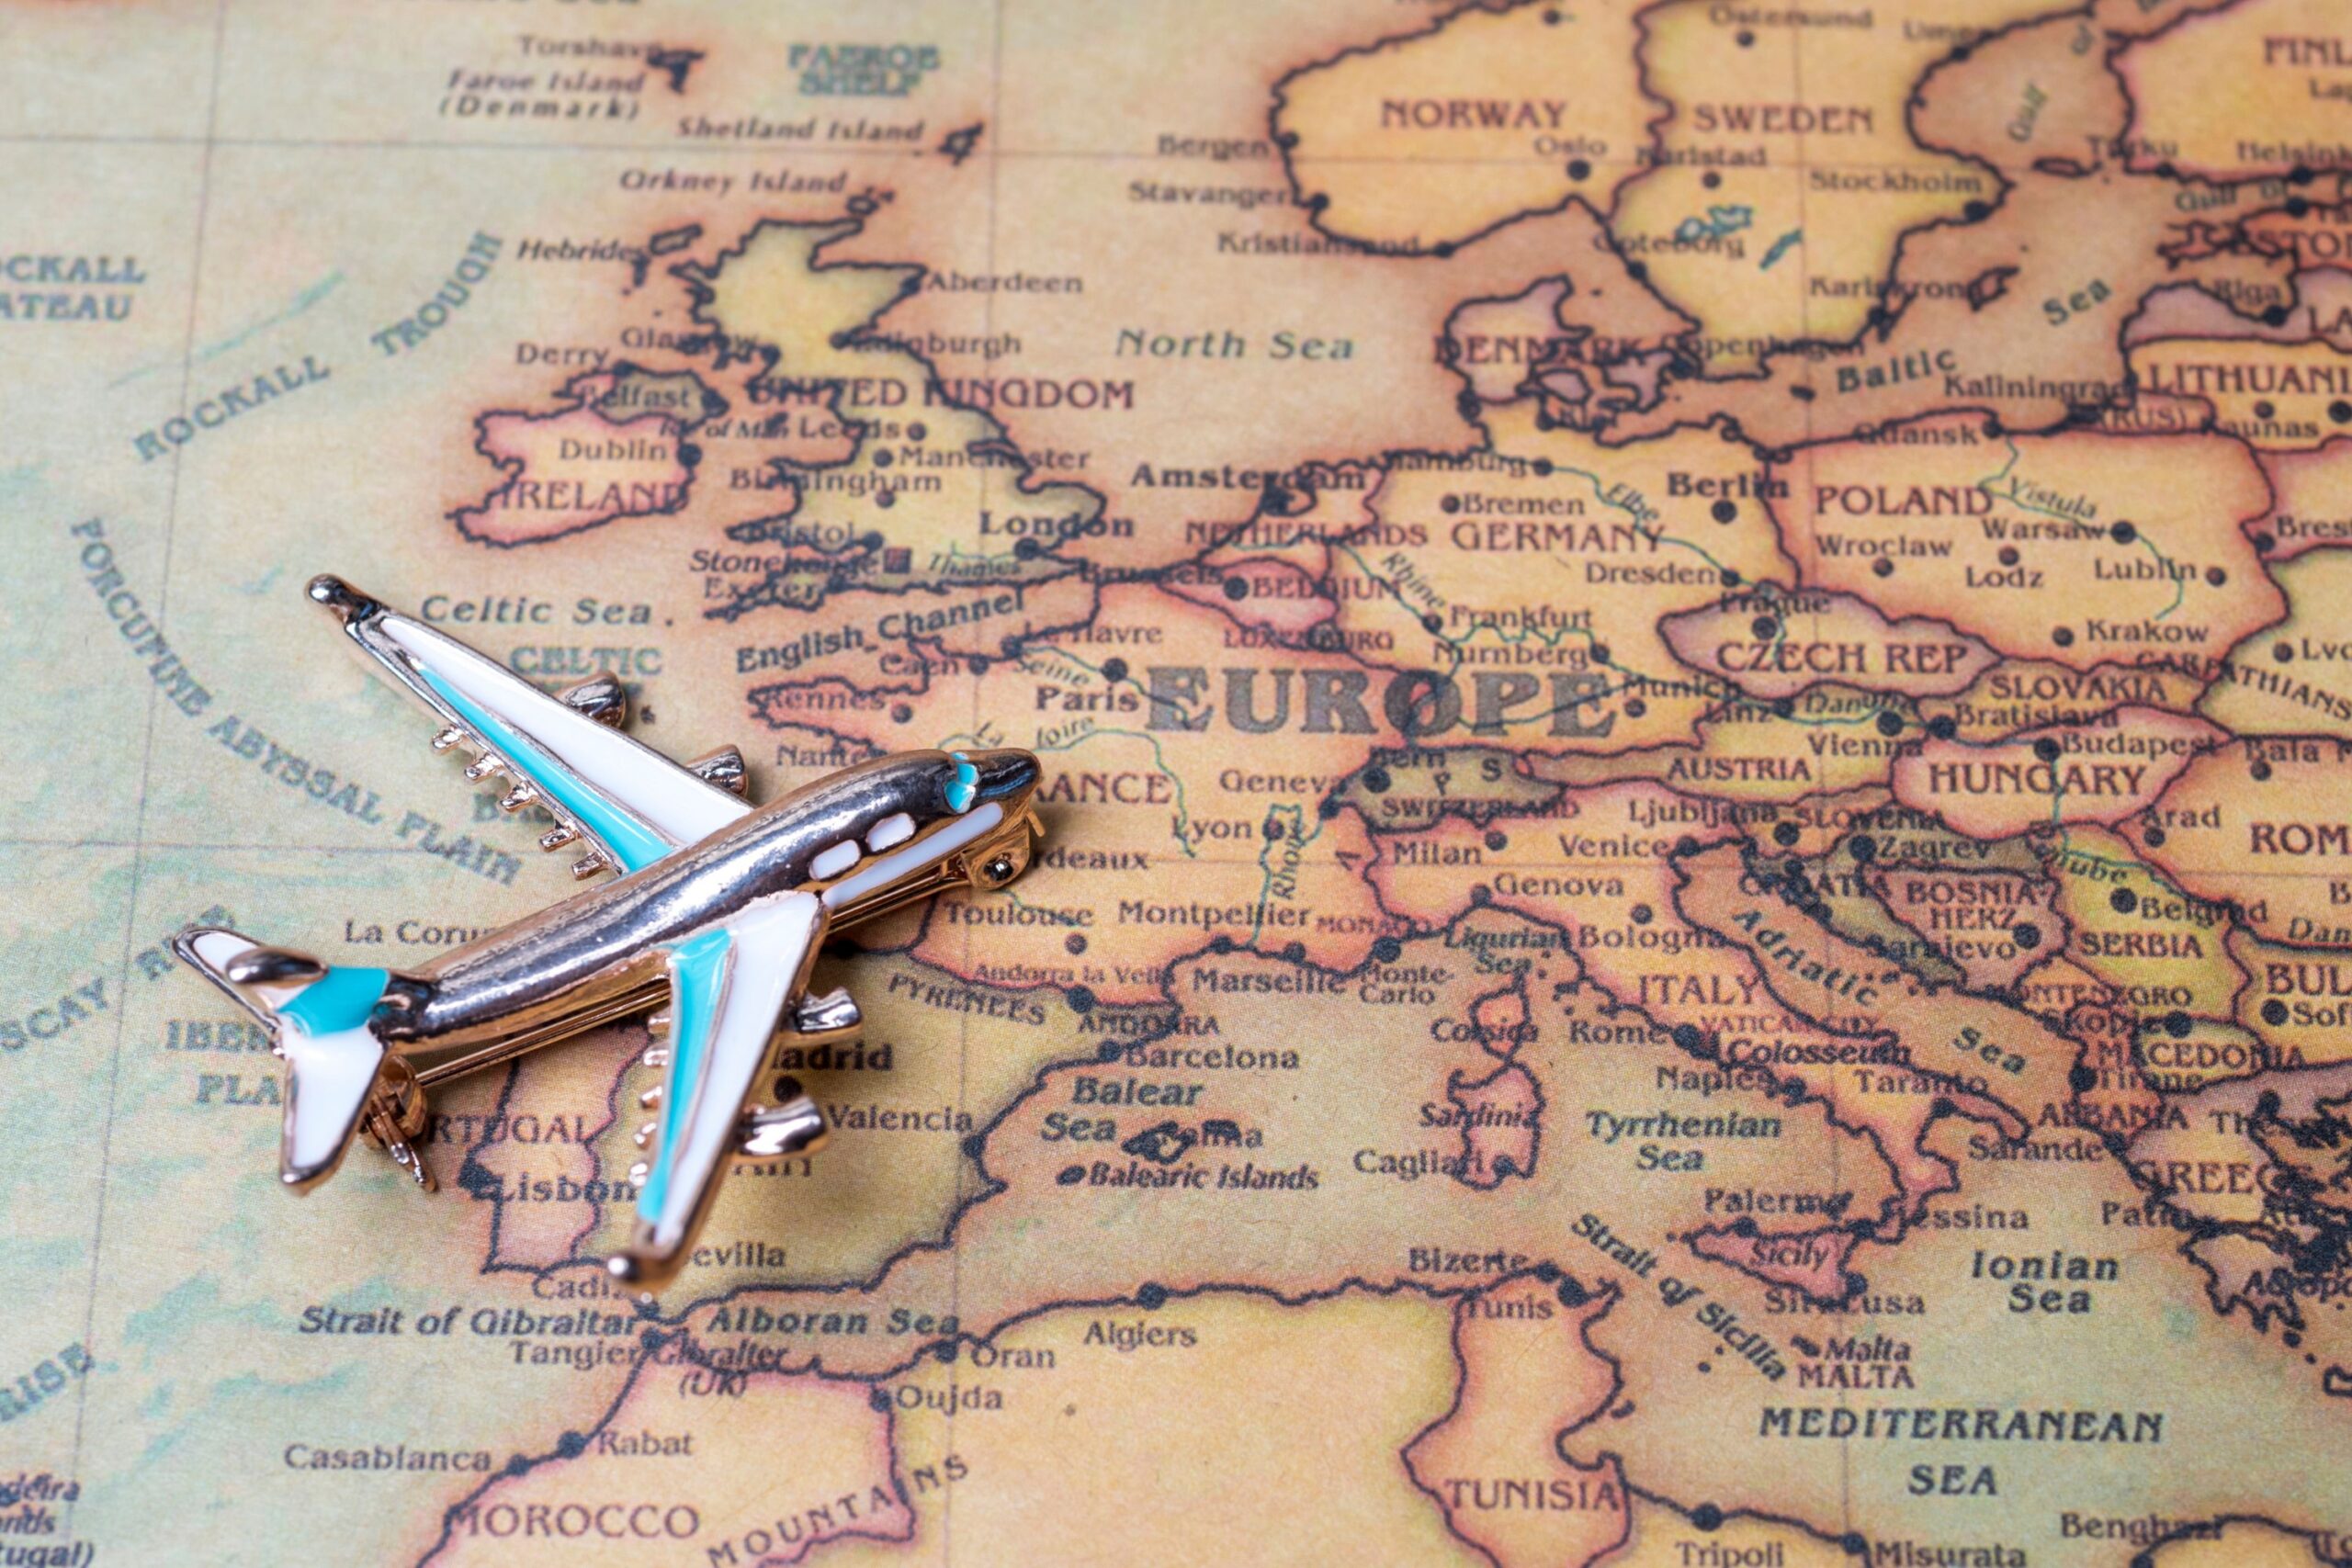 How much in advance should I book a flight within Europe